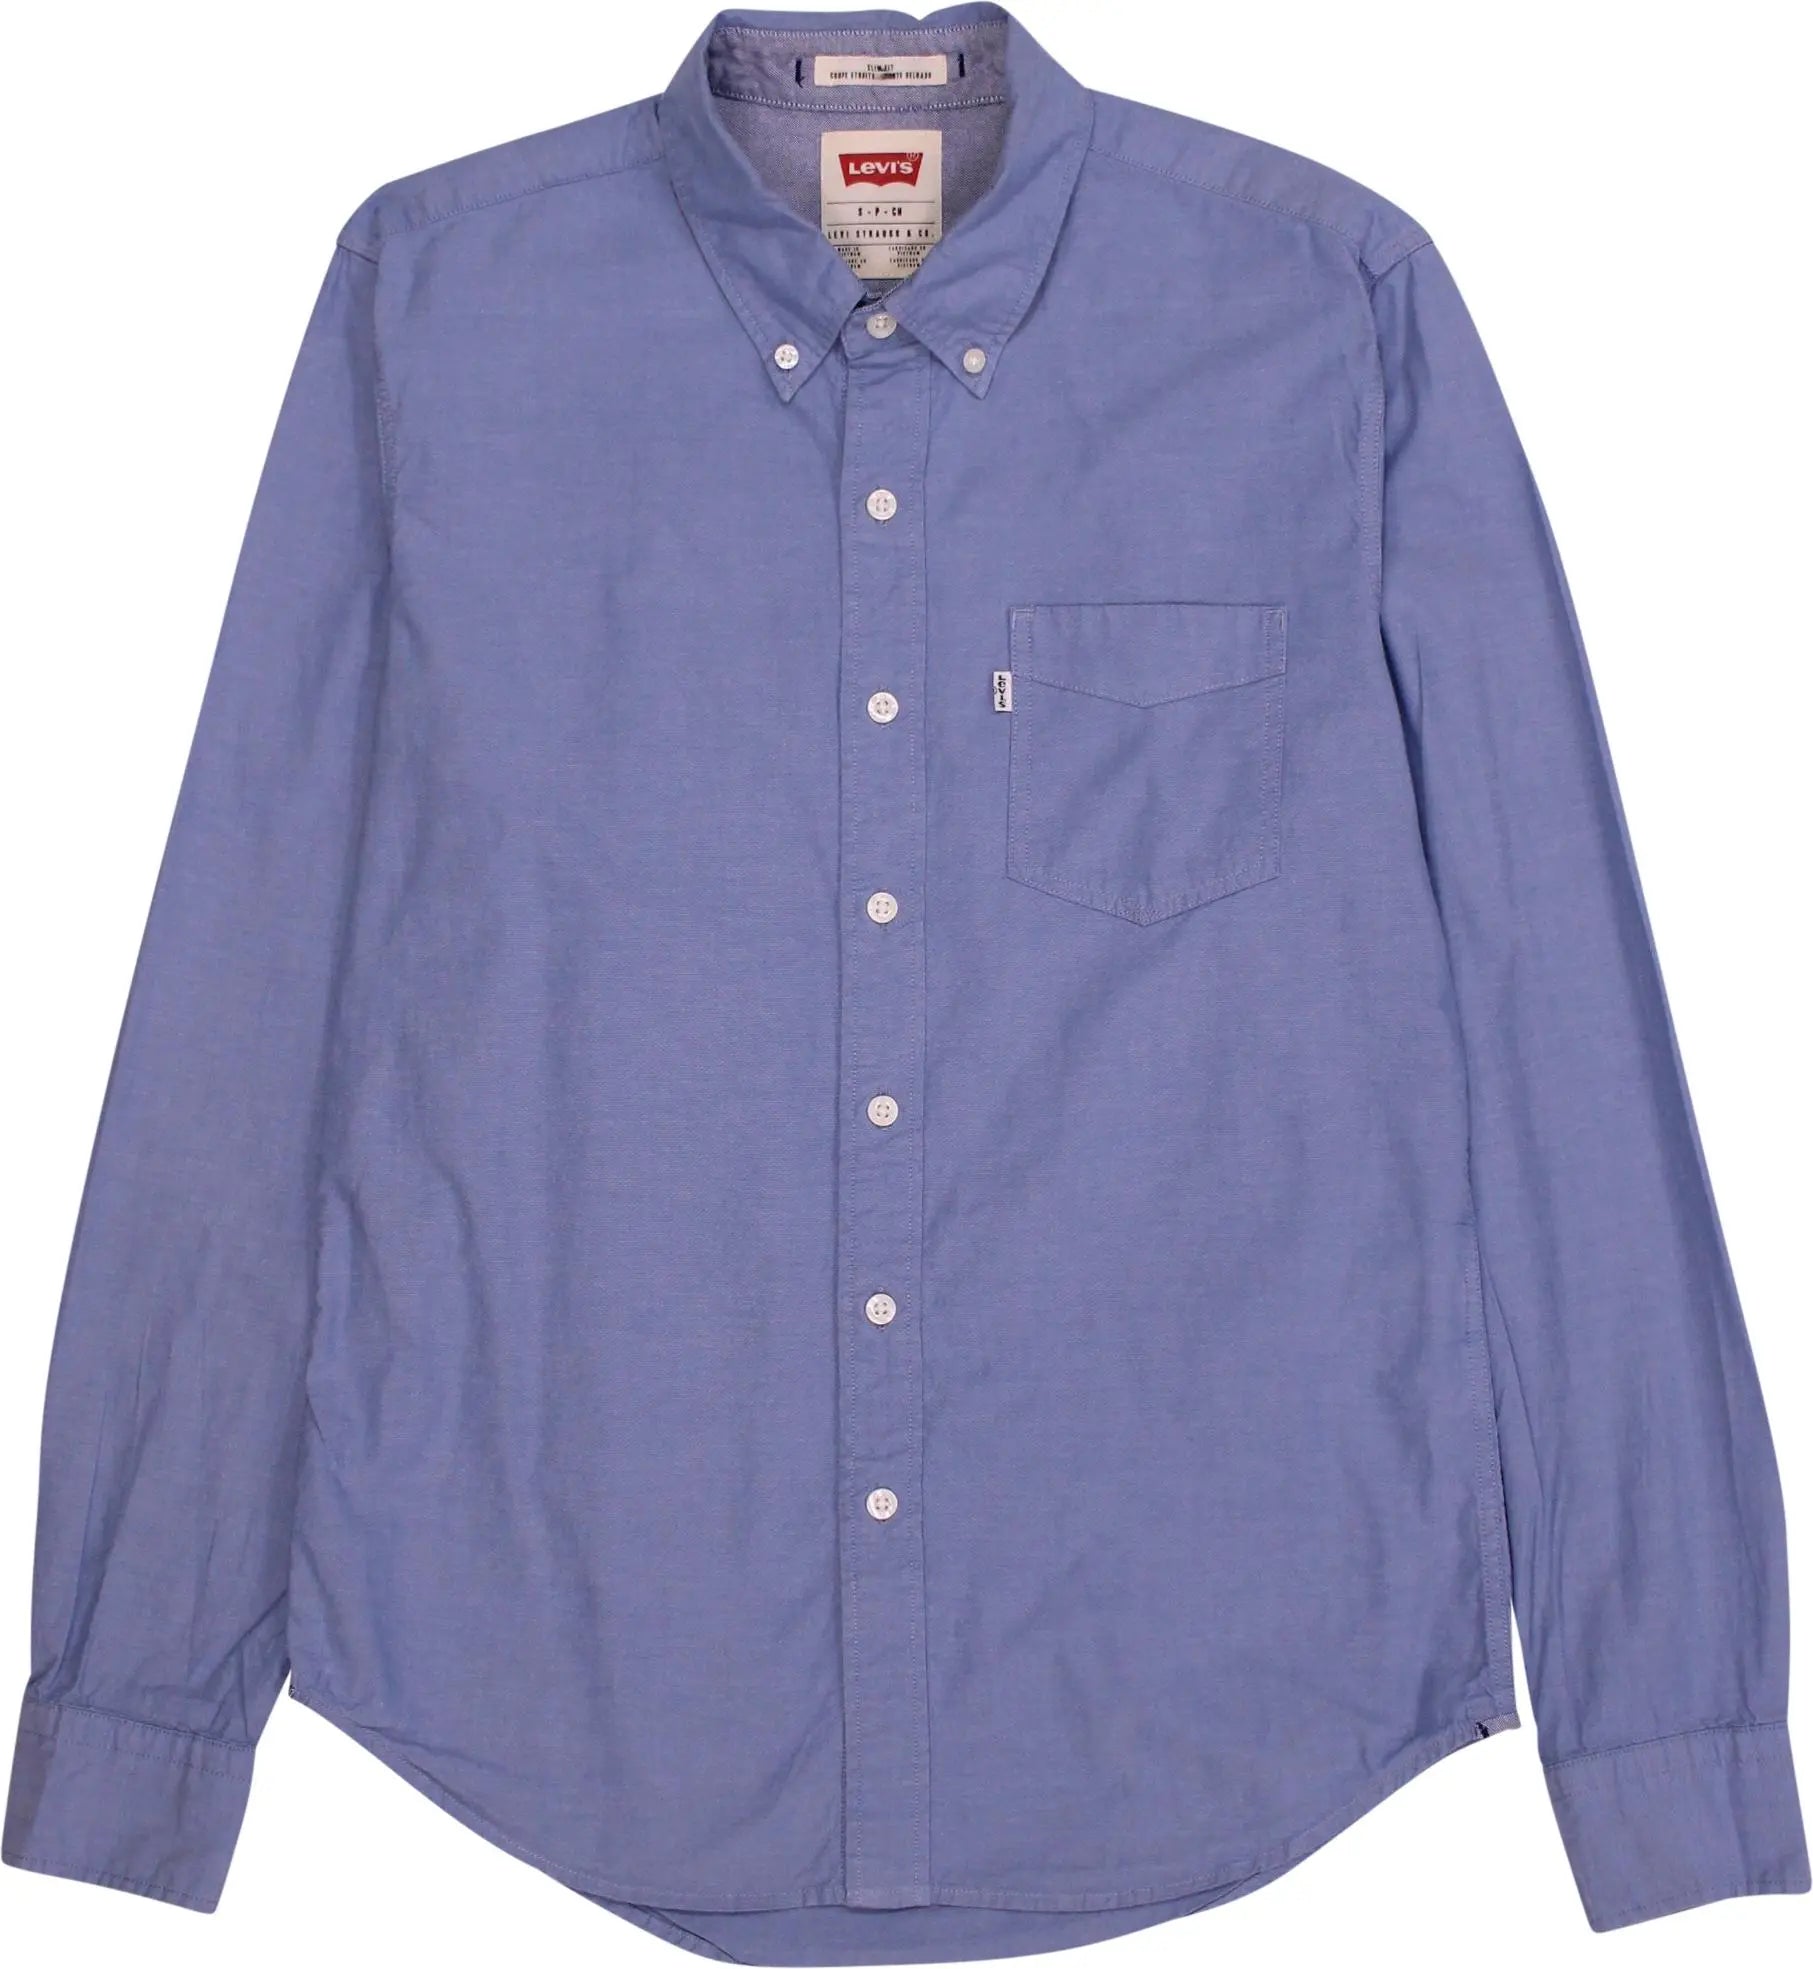 Levi's - Blue Shirt by Levi's- ThriftTale.com - Vintage and second handclothing